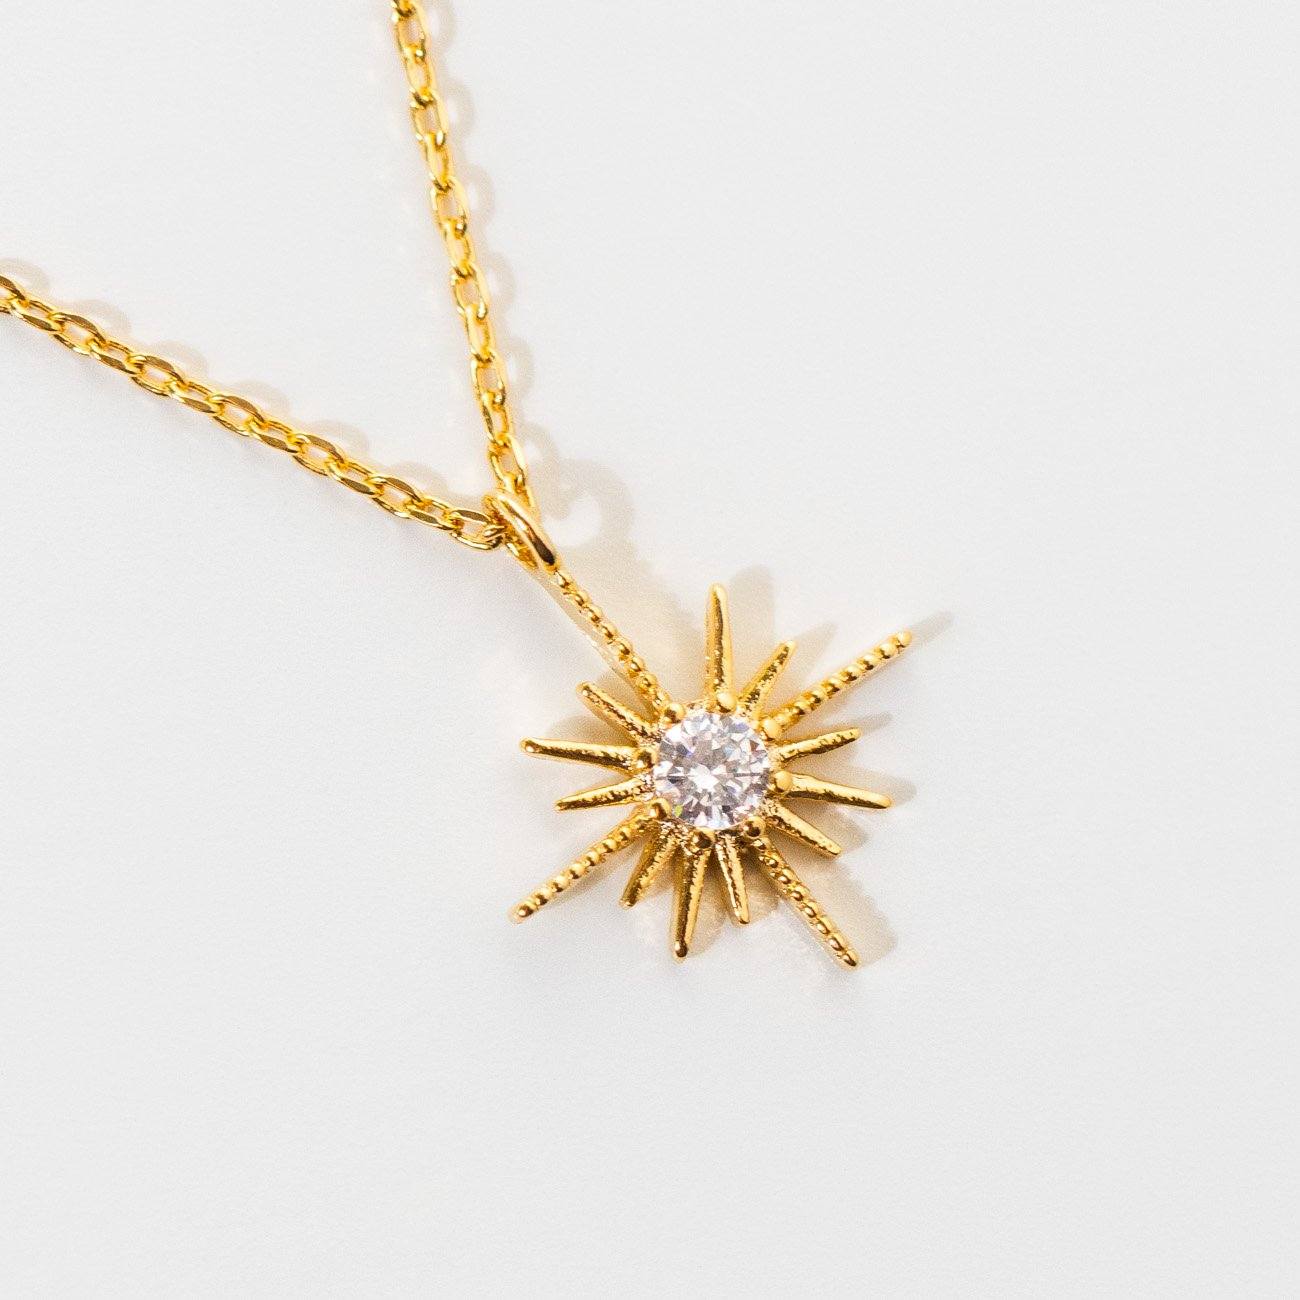 comet necklace unique yellow gold star celestial jewelry